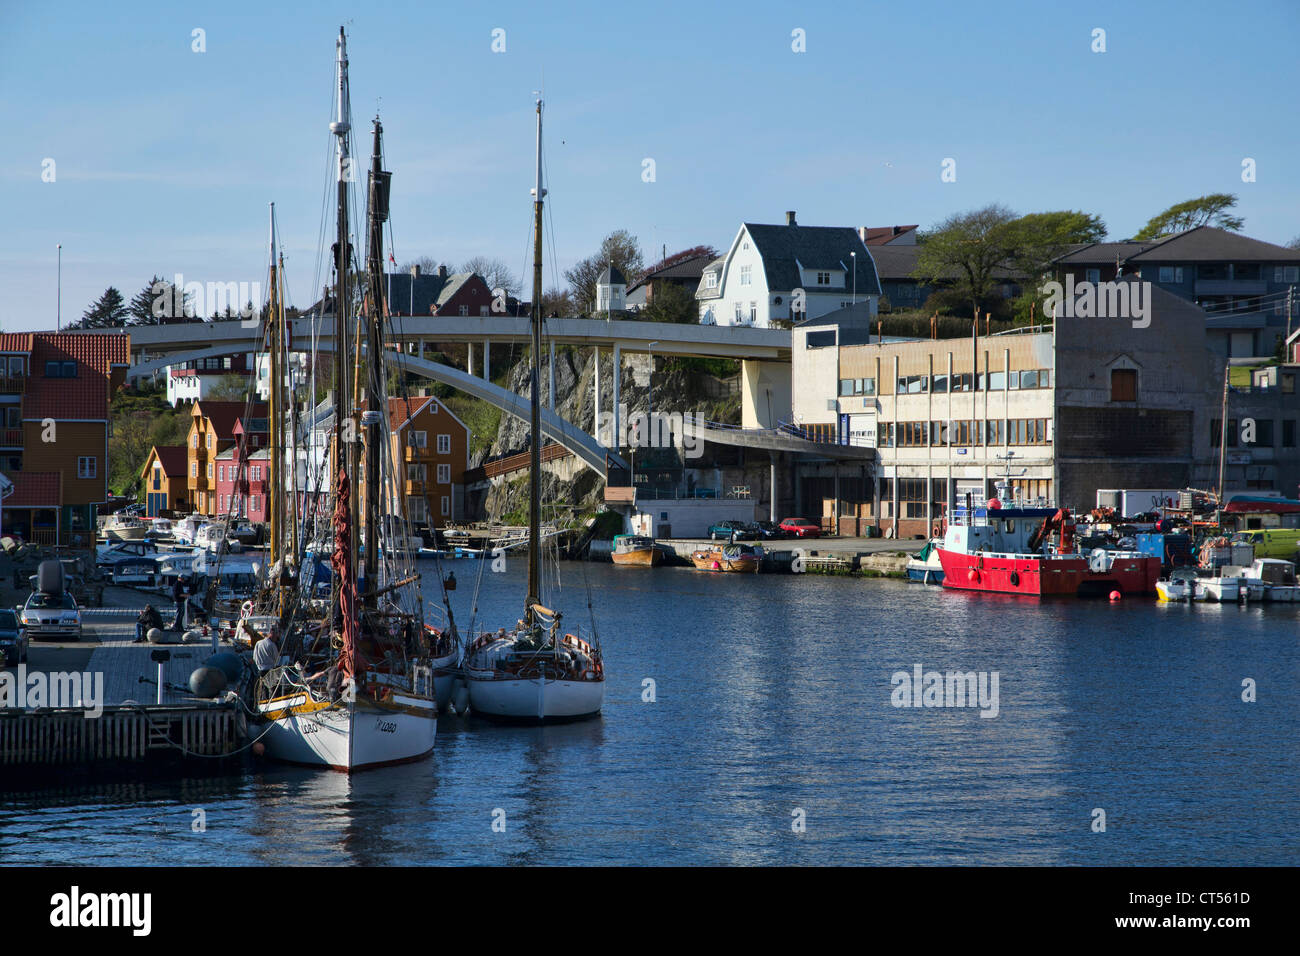 The port of Haugesund. Haugesund is a town and municipality in the county of Rogaland, Norway. Stock Photo